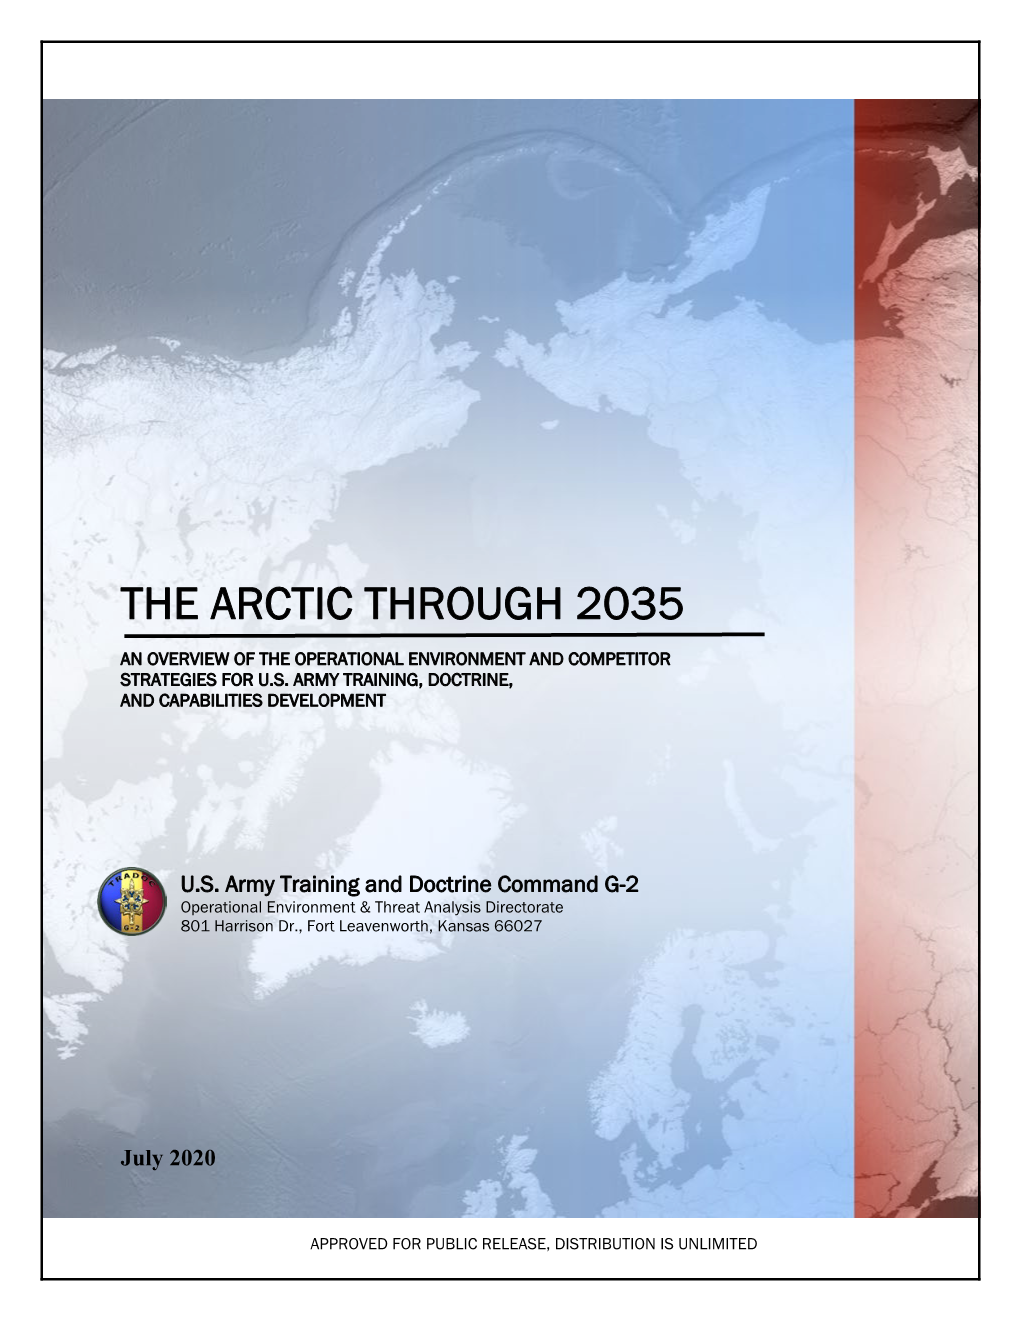 The Arctic Through 2035 an Overview of the Operational Environment and Competitor Strategies for U.S